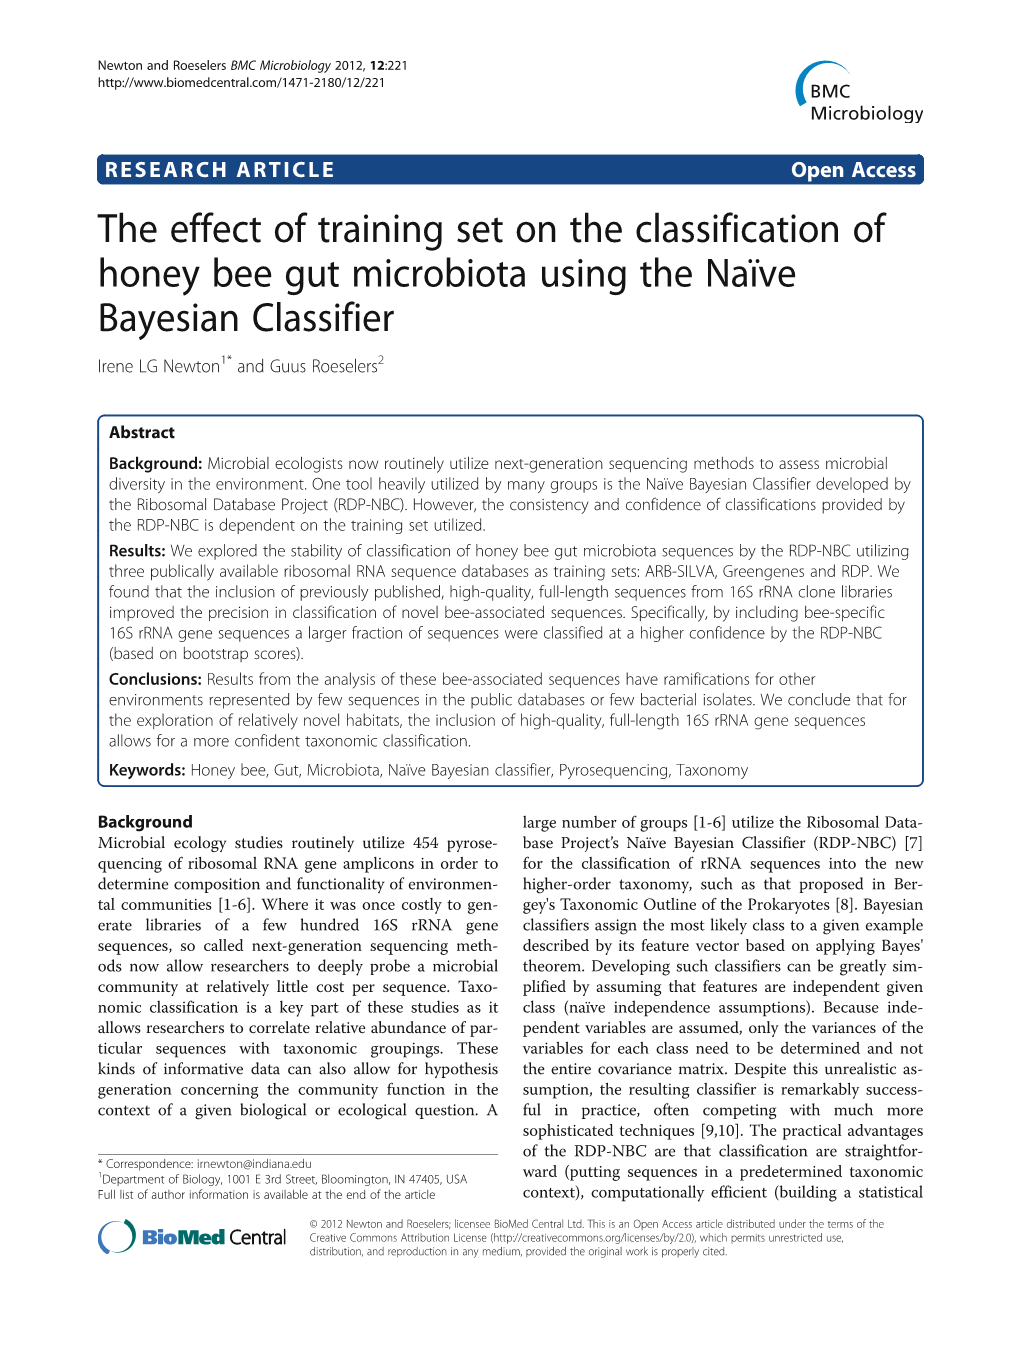 The Effect of Training Set on the Classification of Honey Bee Gut Microbiota Using the Naïve Bayesian Classifier Irene LG Newton1* and Guus Roeselers2